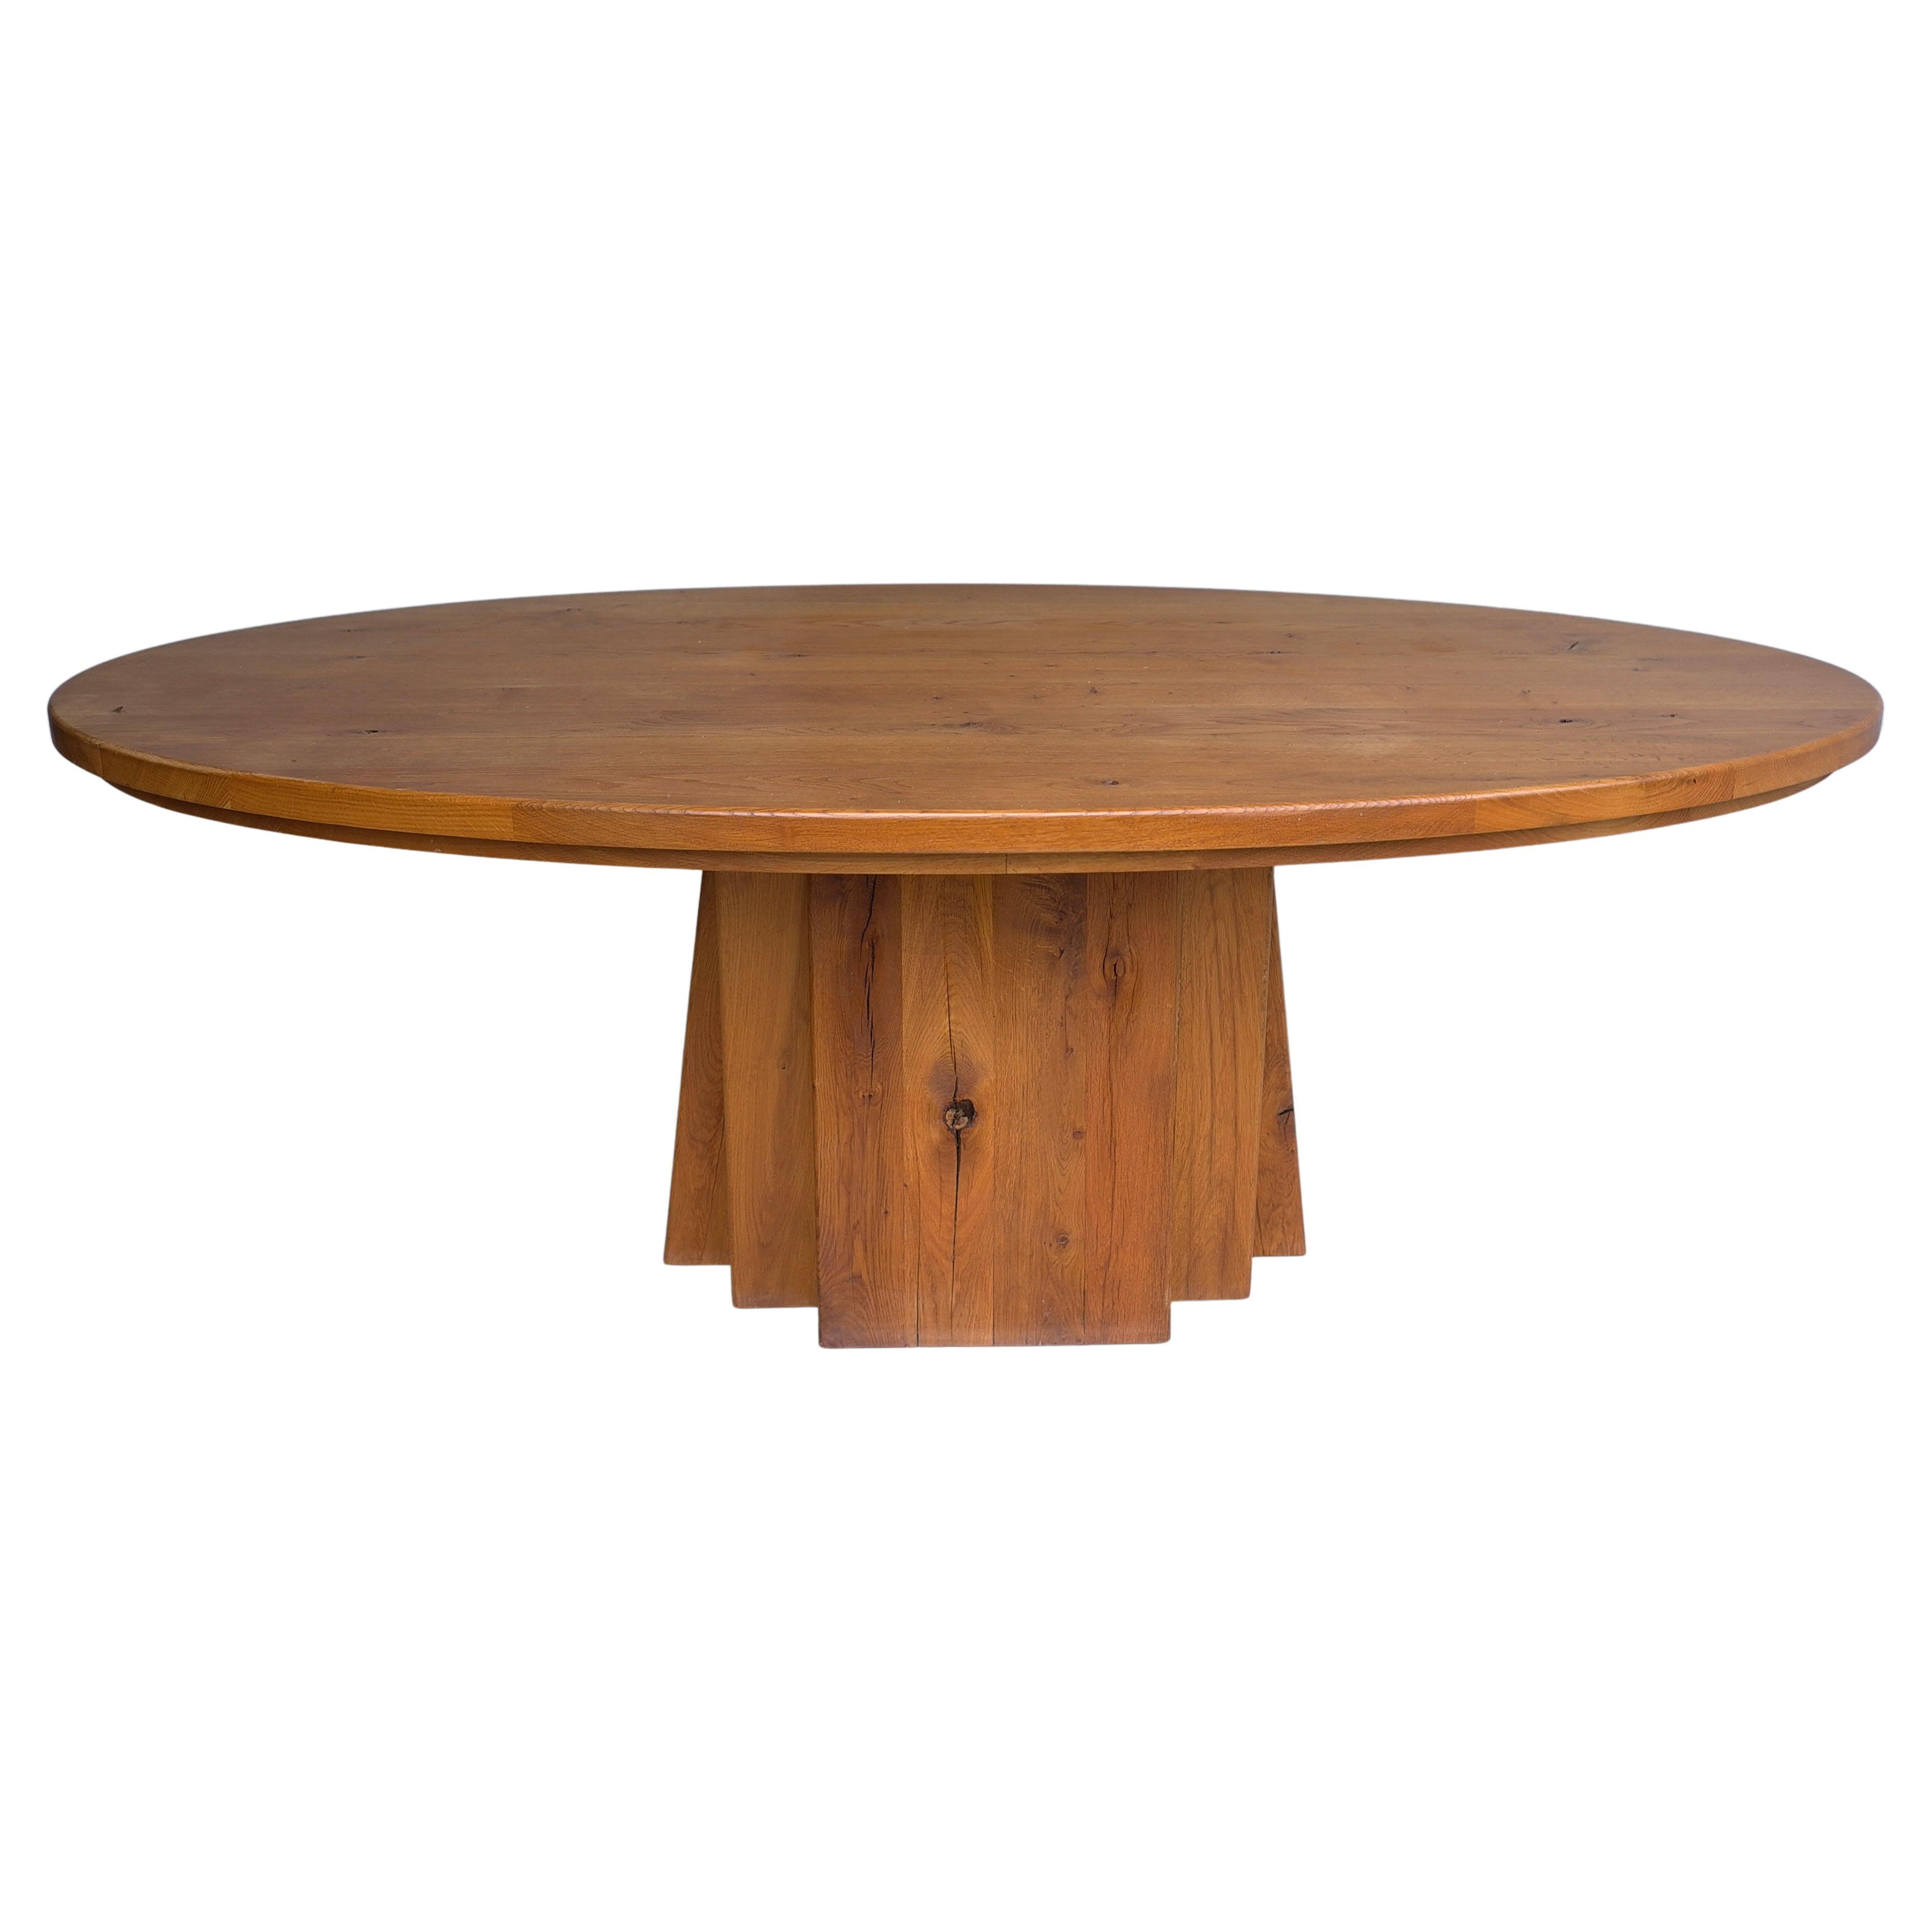 Large Oval Solid Oak Dining Table in style of Pierre Chapo, France circa 1970 For Sale